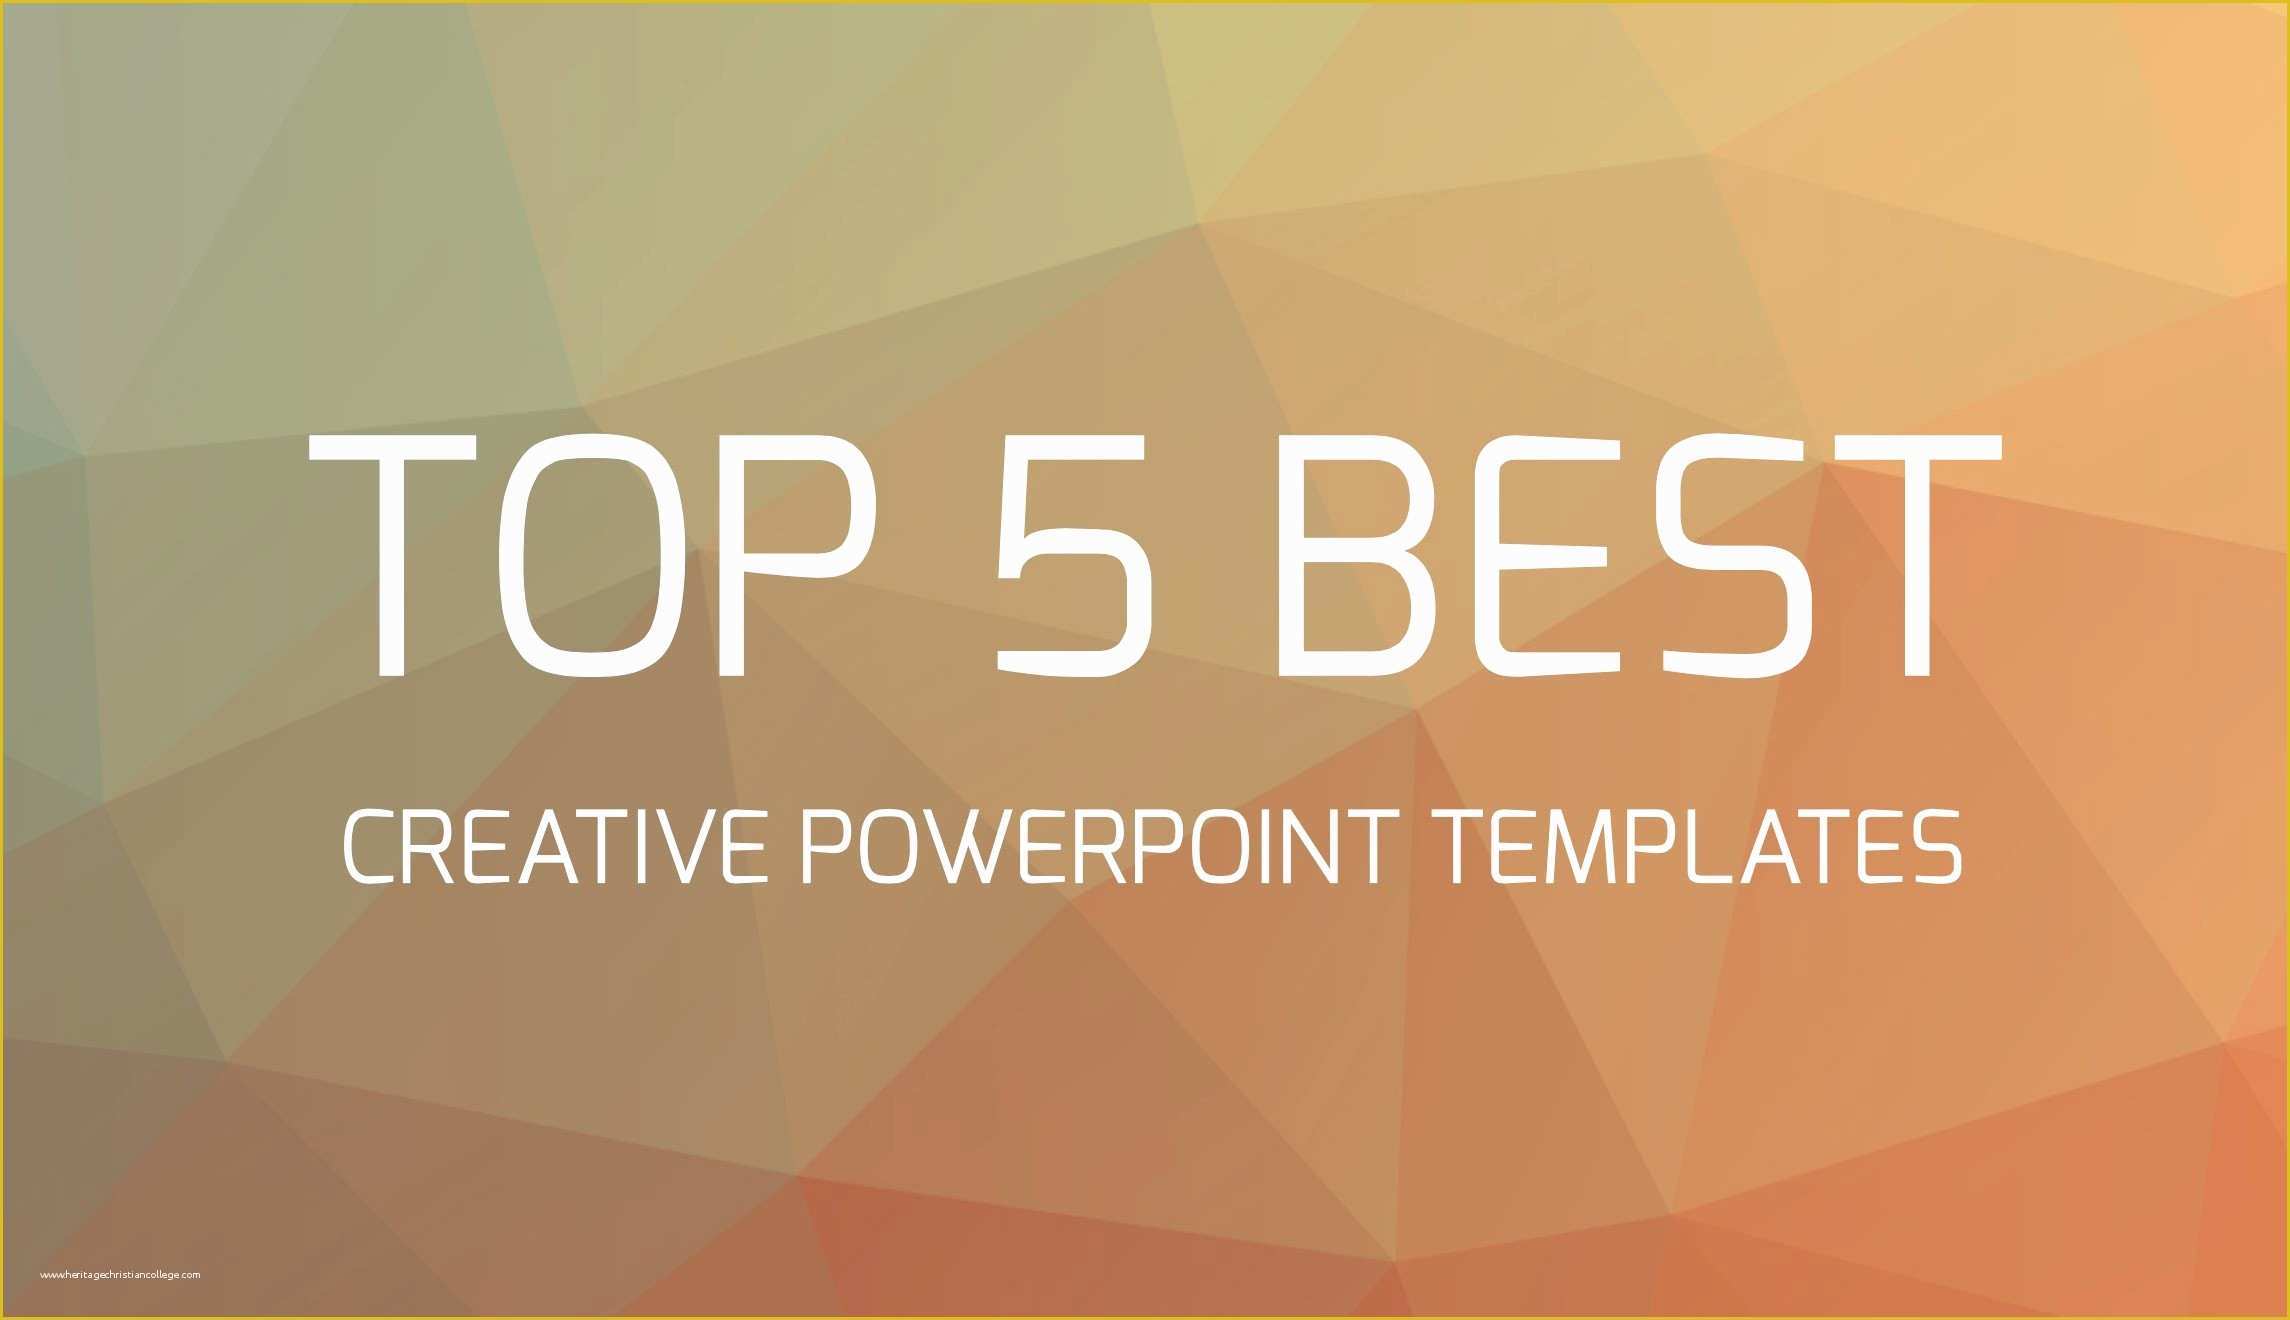 Templates Powerpoint Free Download Of 42 Cool Powerpoint Backgrounds ·① Download Free Awesome